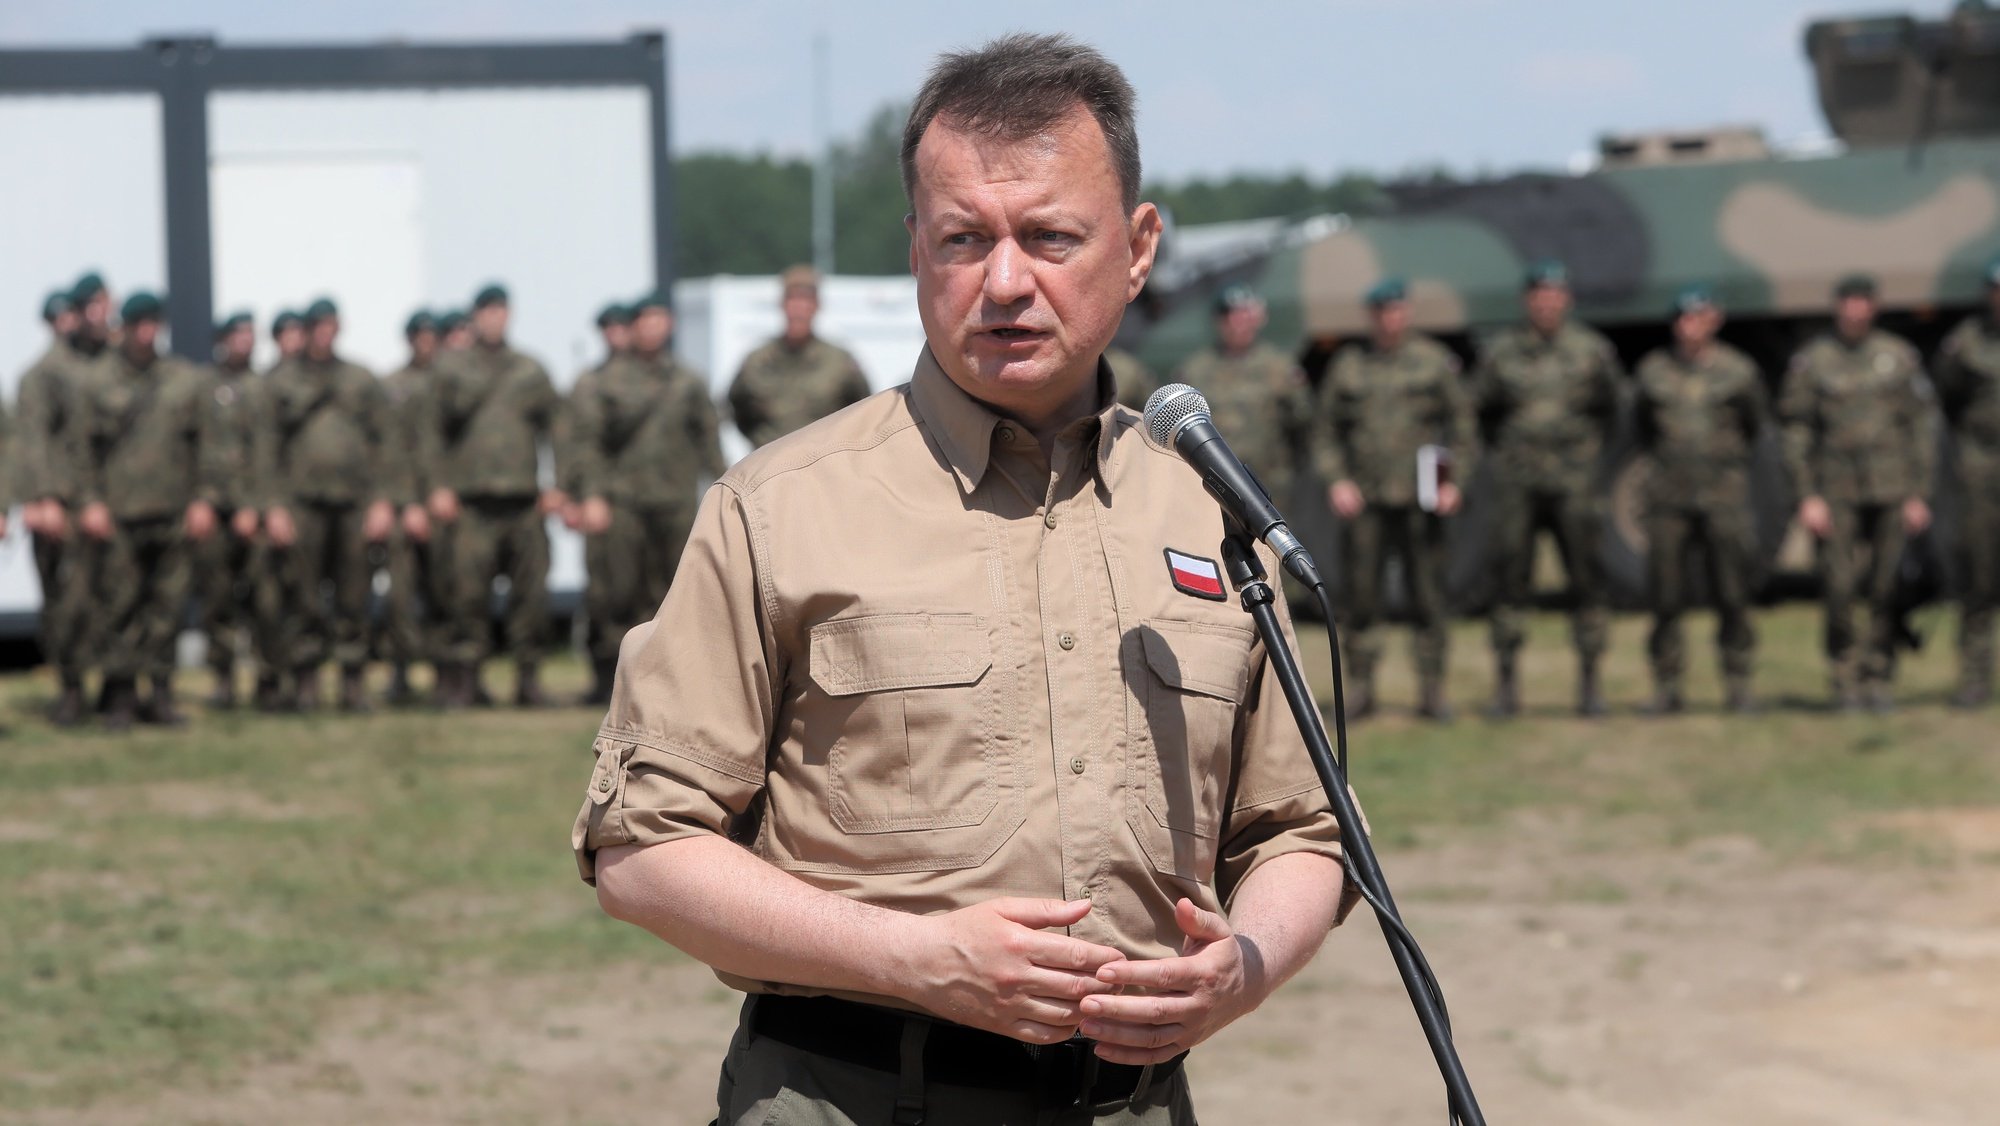 epa10036773 Deputy Prime Minister, Minister of National Defence Mariusz Blaszczak speaking to the media after a briefing on the situation on the Polish-Belarusian border, at a military encampment in the town of Nowa Luka, eastern Poland, 27 June 2022. Poland dealt with illegal imigration of Belarus, but Border security is especially following Russia&#039;s military invasion in Ukraine.  EPA/Artur Reszko POLAND OUT